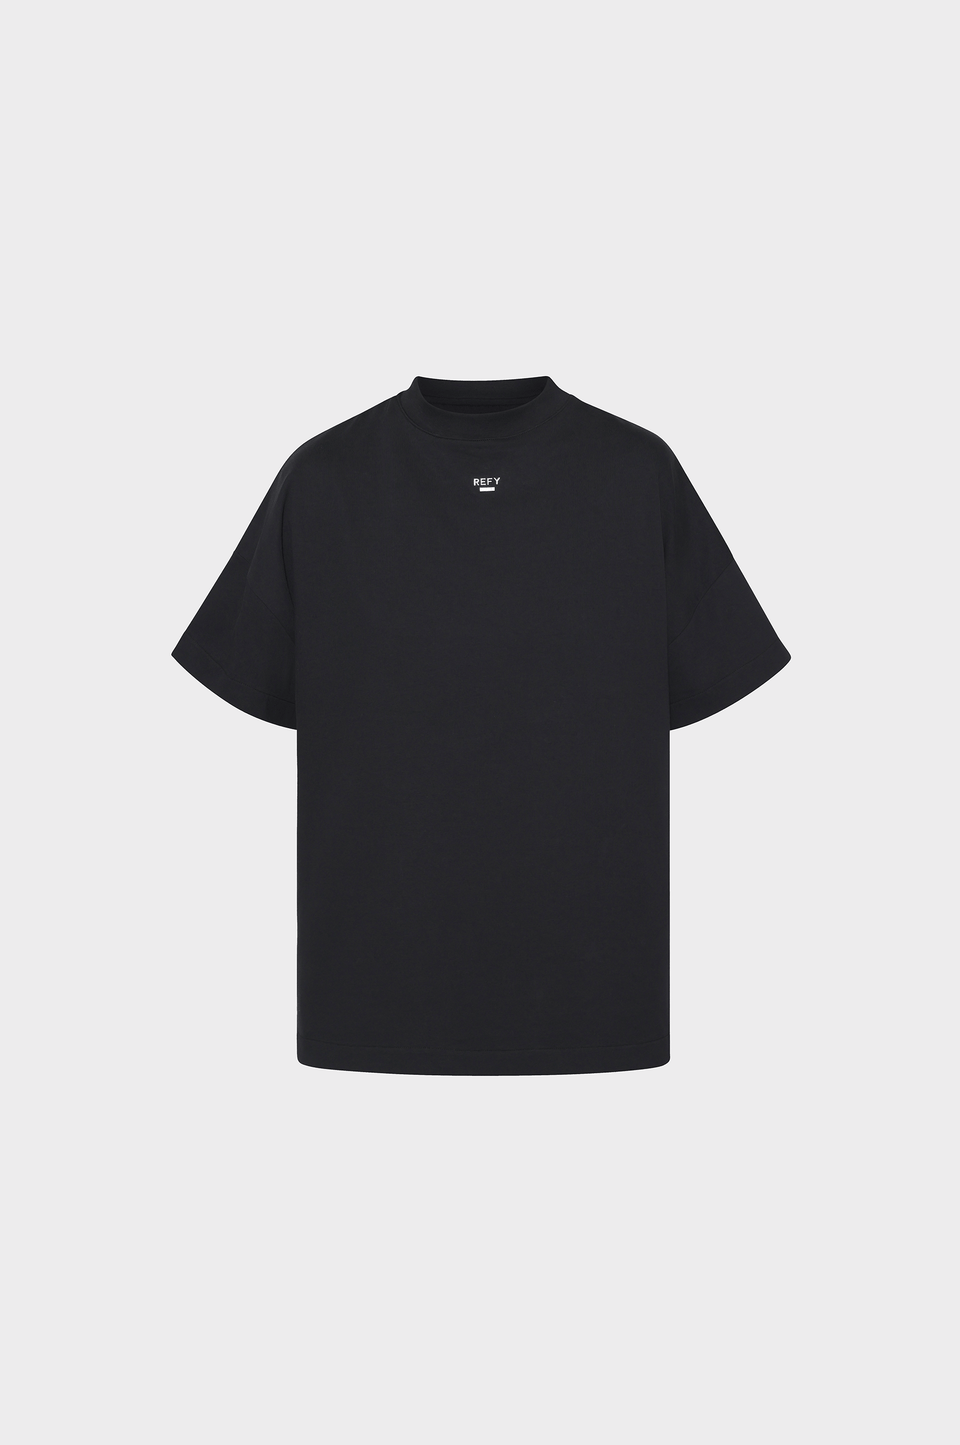 CLOSE UP OF REFY BOXY T-SHIRT IN BLACK